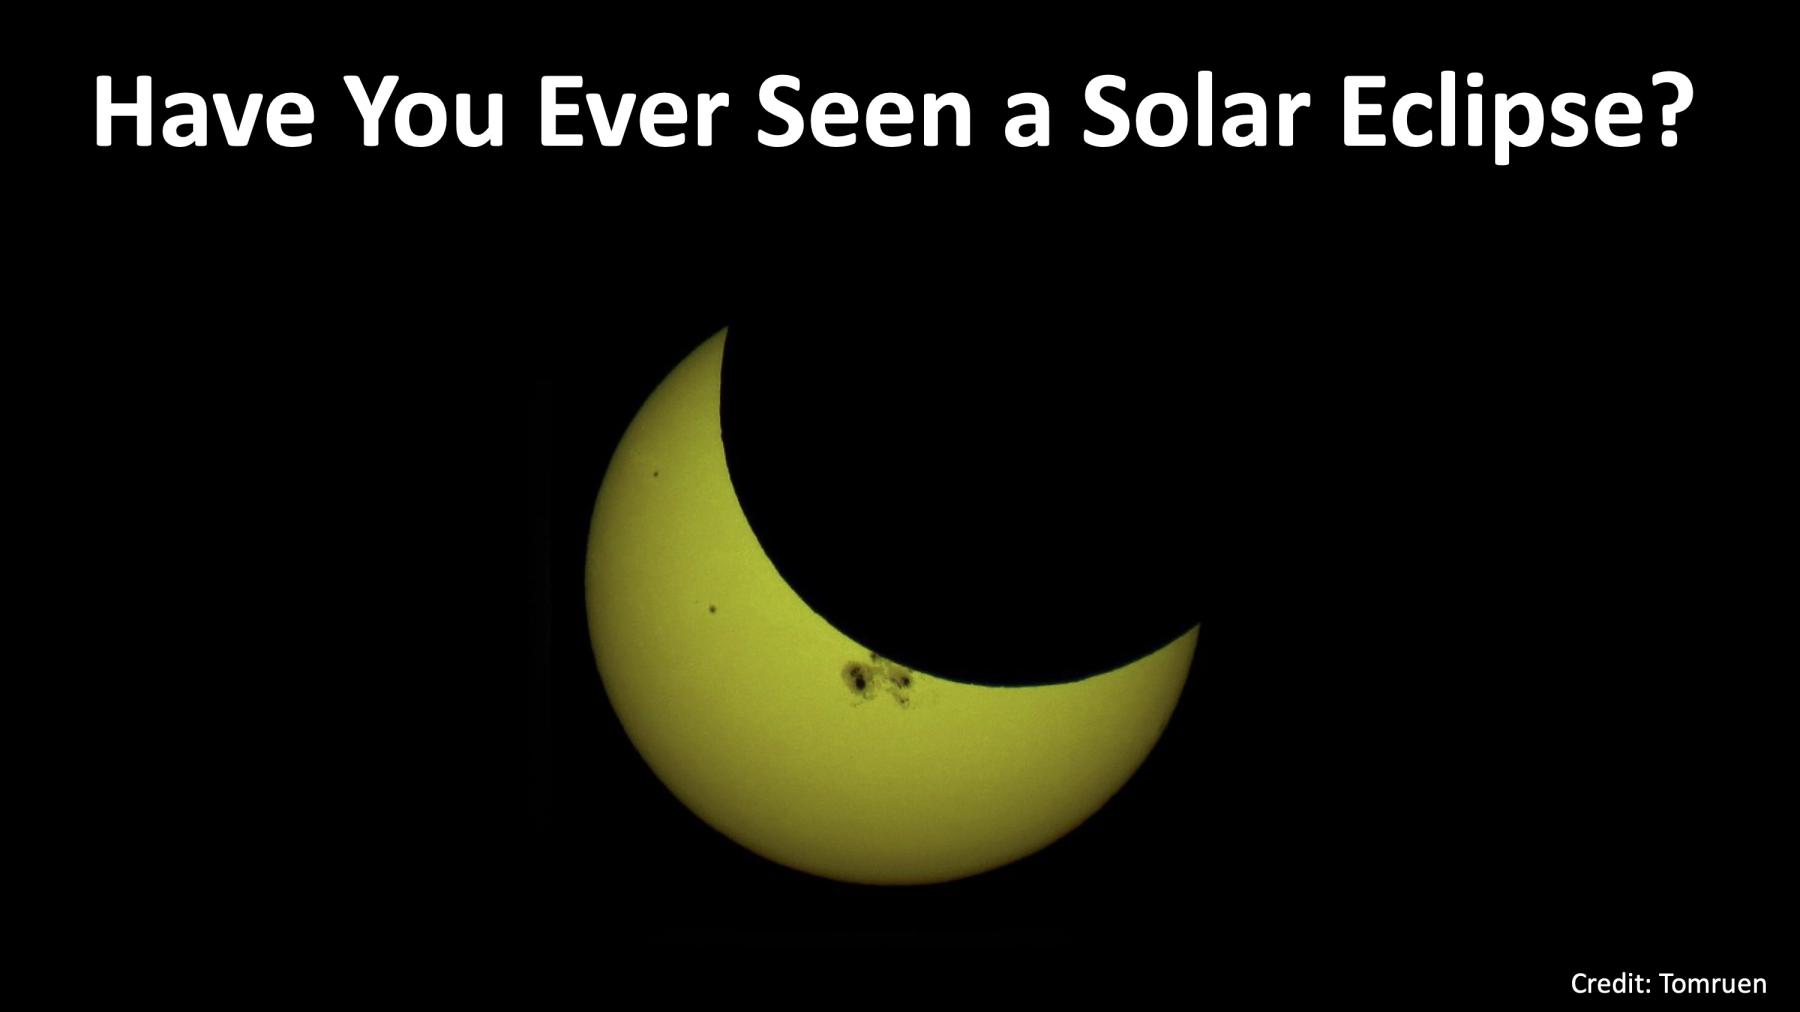 NISE Network_Solar Eclipse slides 2023 Have you ever seen a solar eclipse question showing a partial eclipse of the Sun